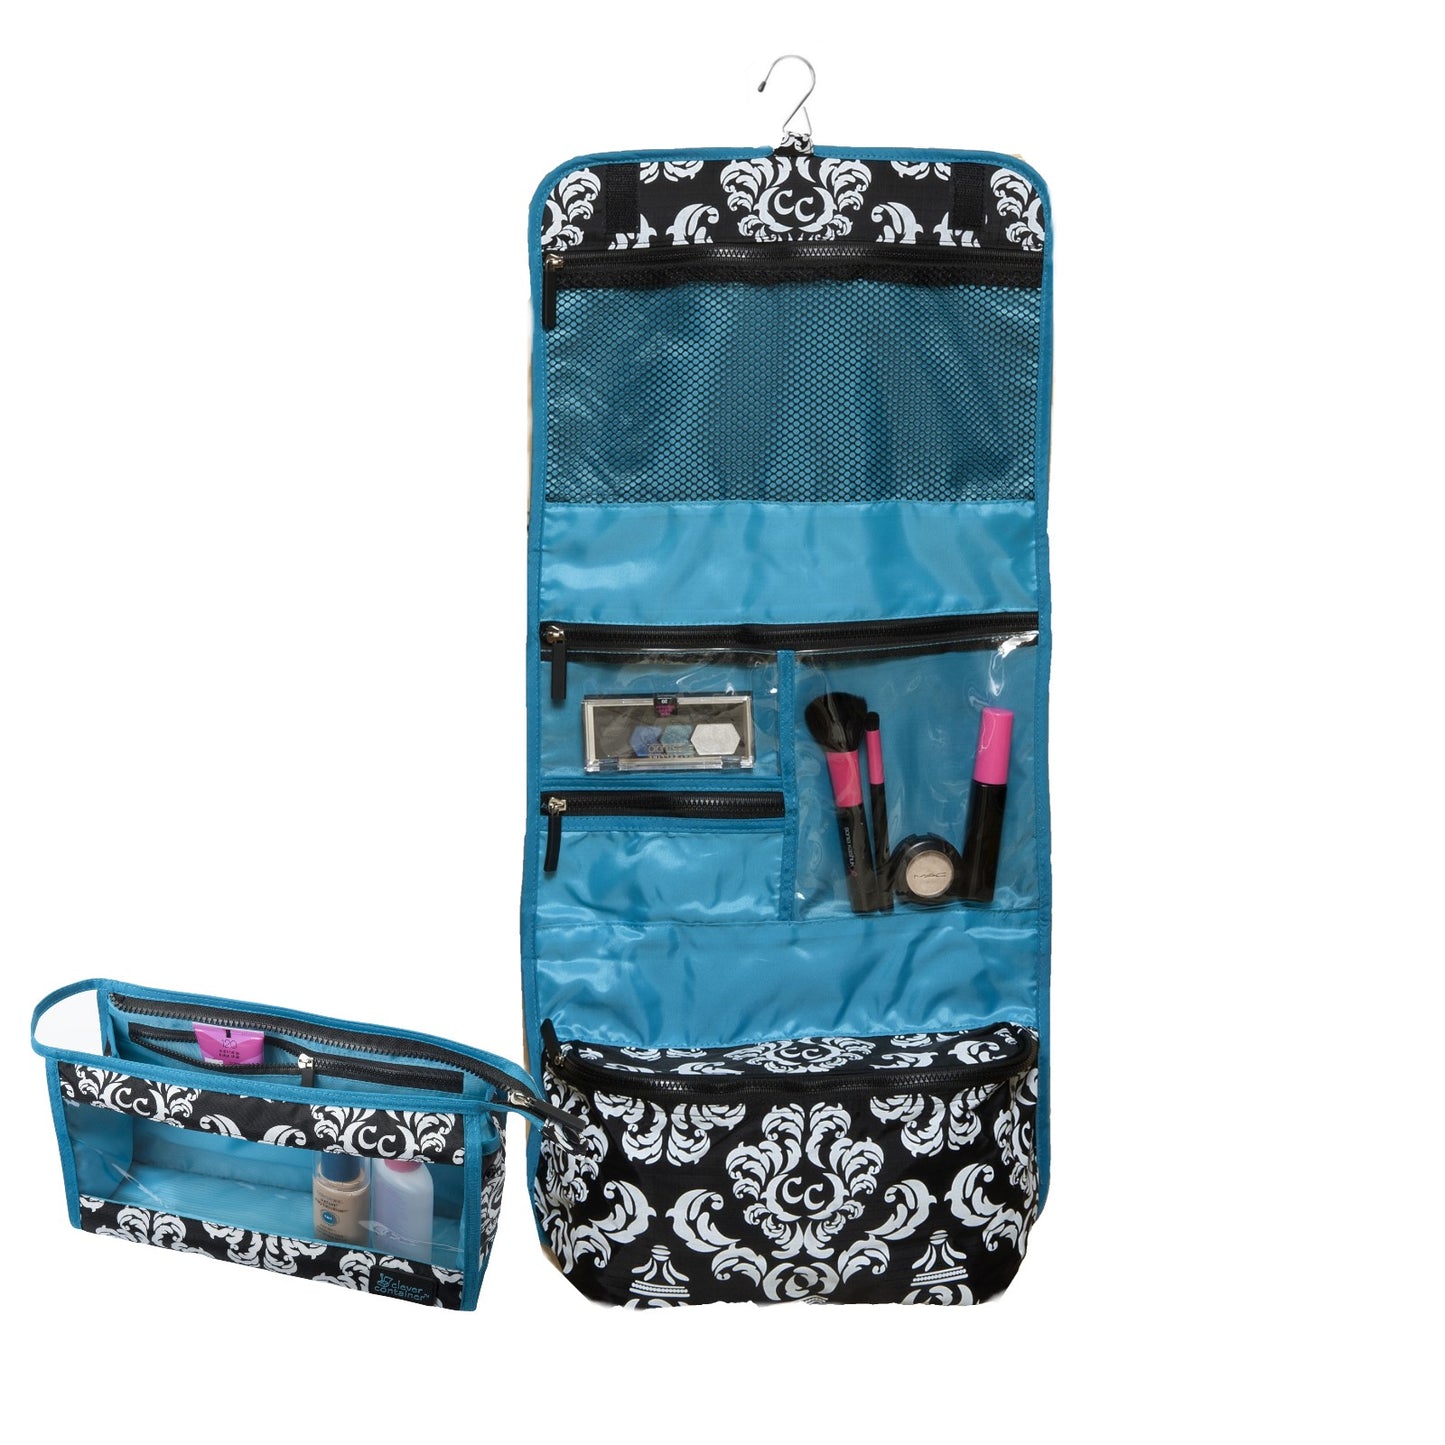 Two-Piece Hanging Travel Set - Damask with Teal